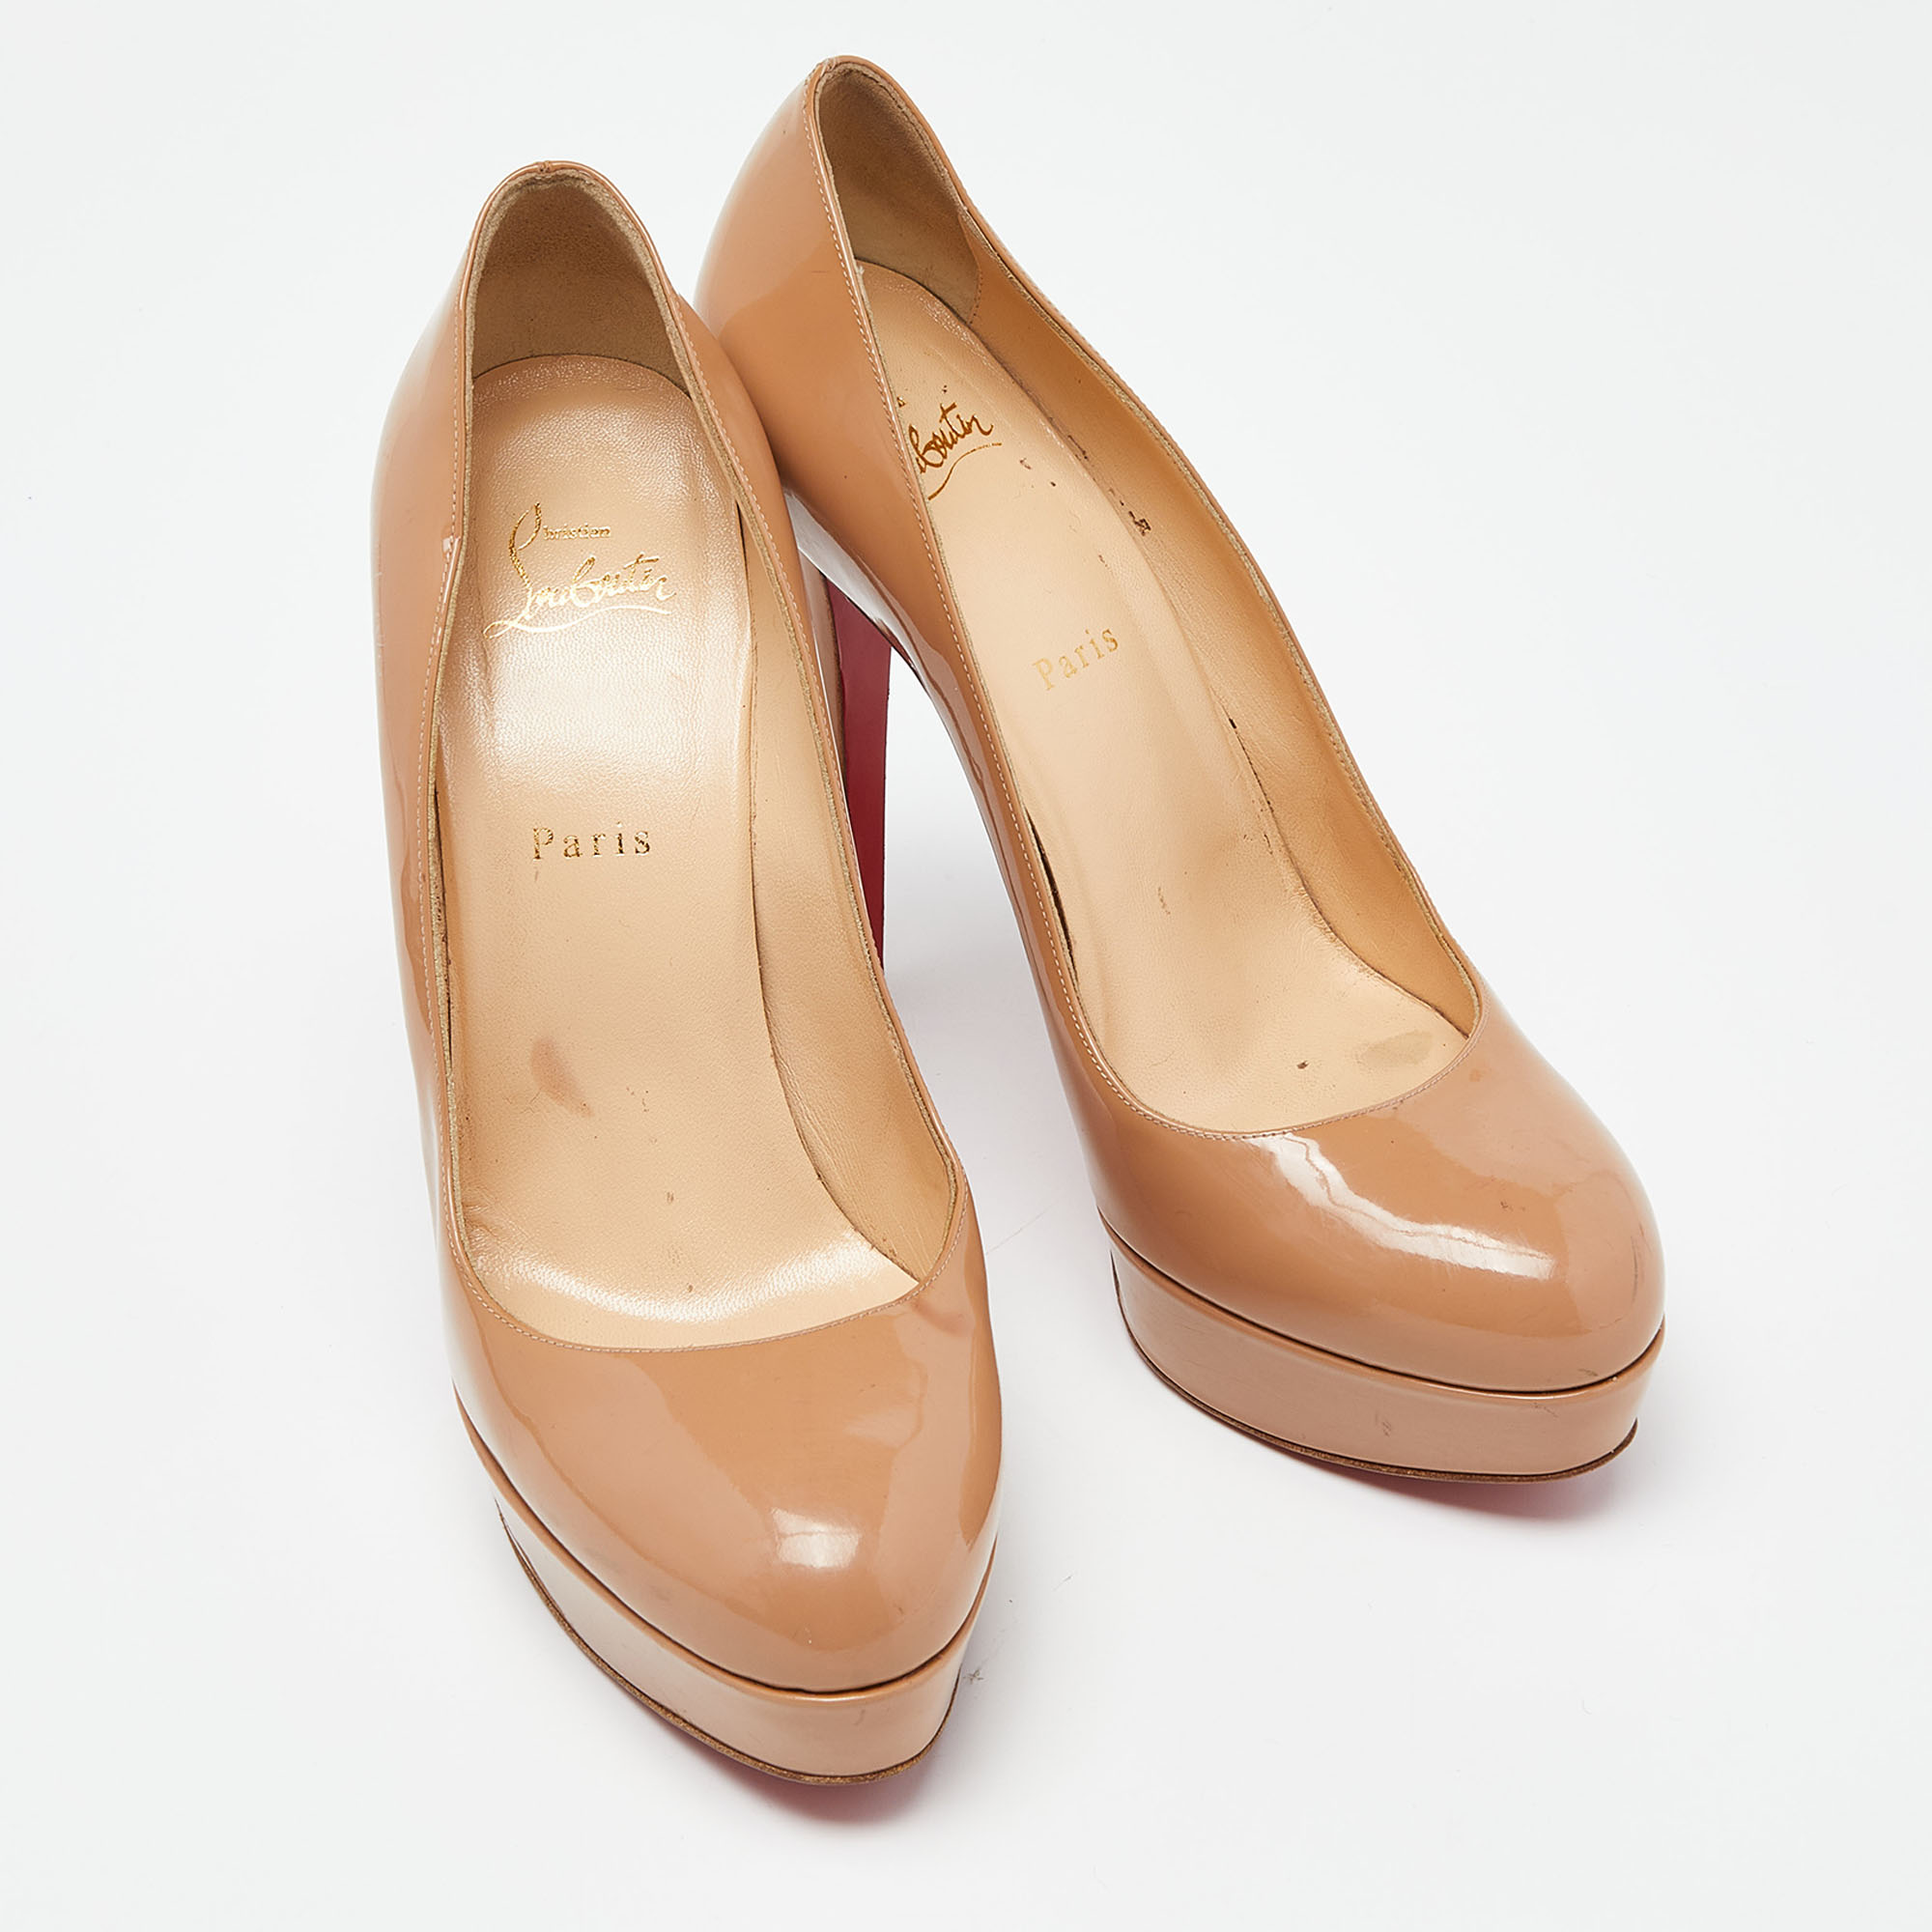 Christian Louboutin Beige Patent Leather Bianca Pumps Size 41.5